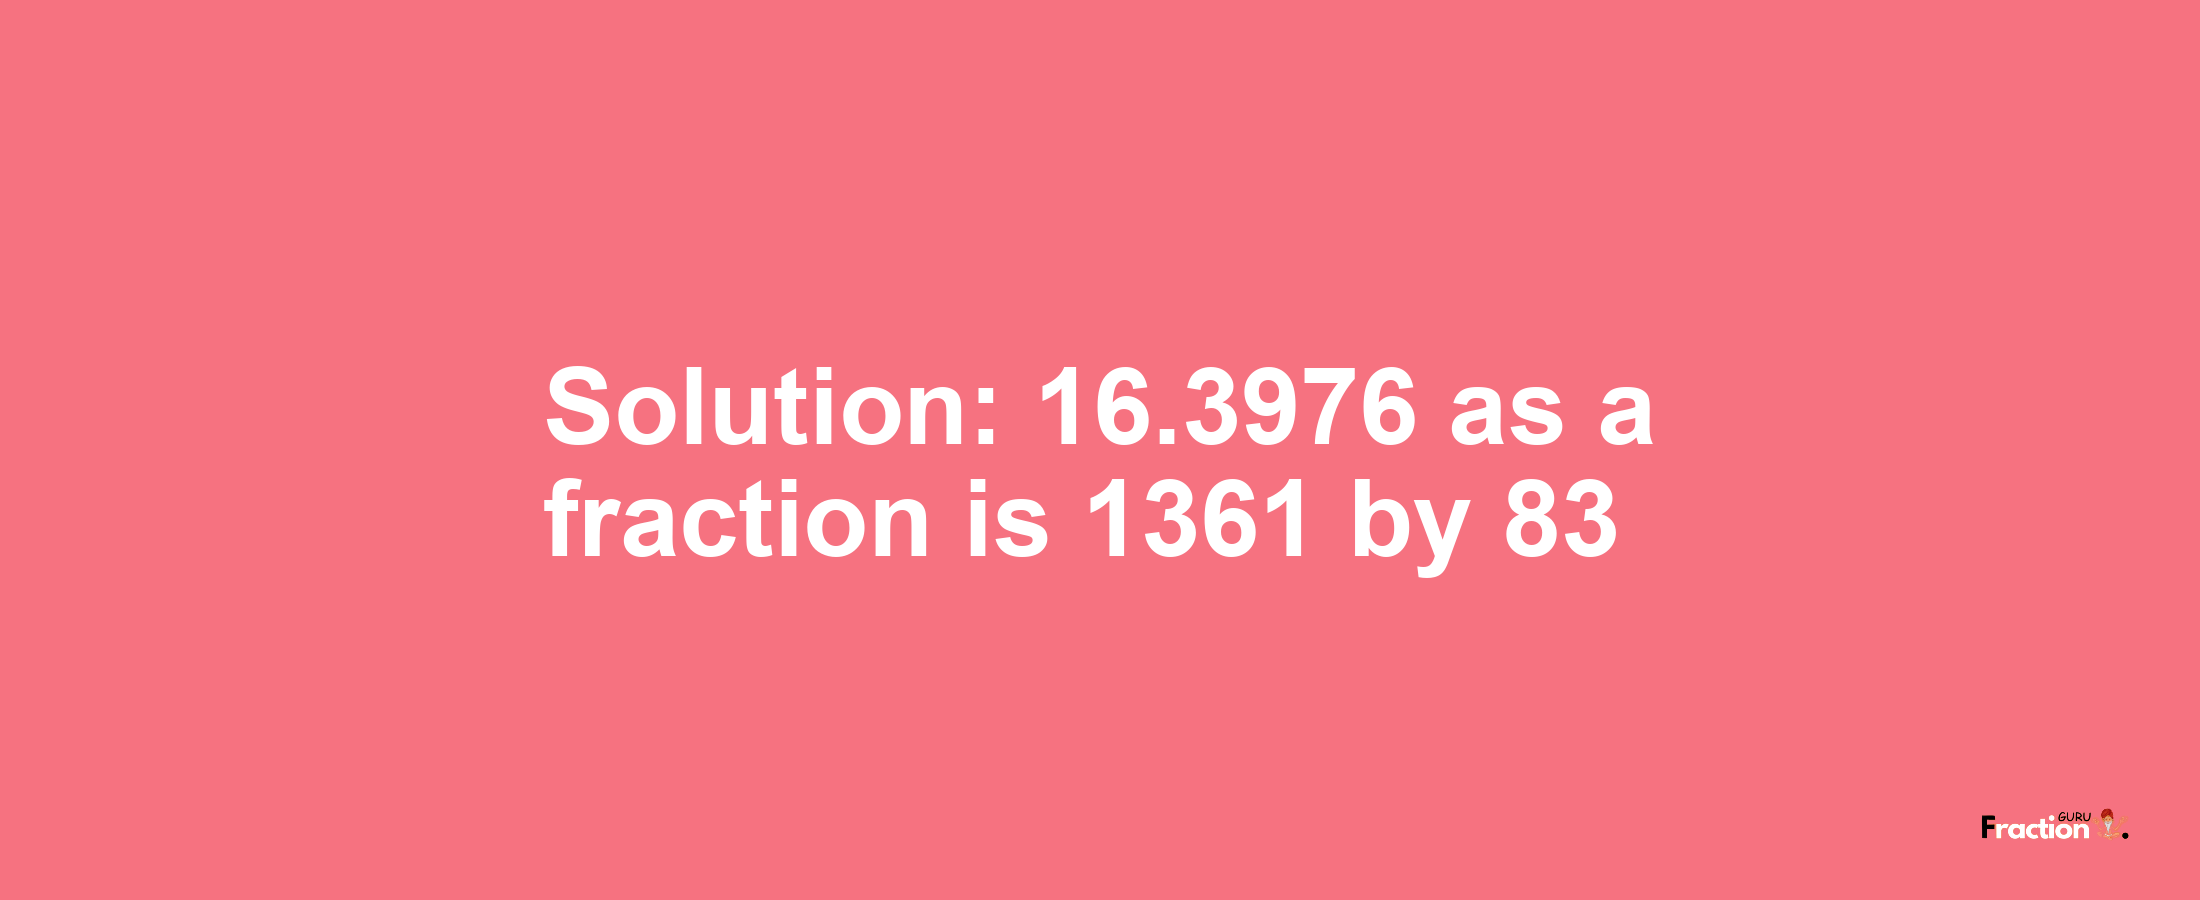 Solution:16.3976 as a fraction is 1361/83